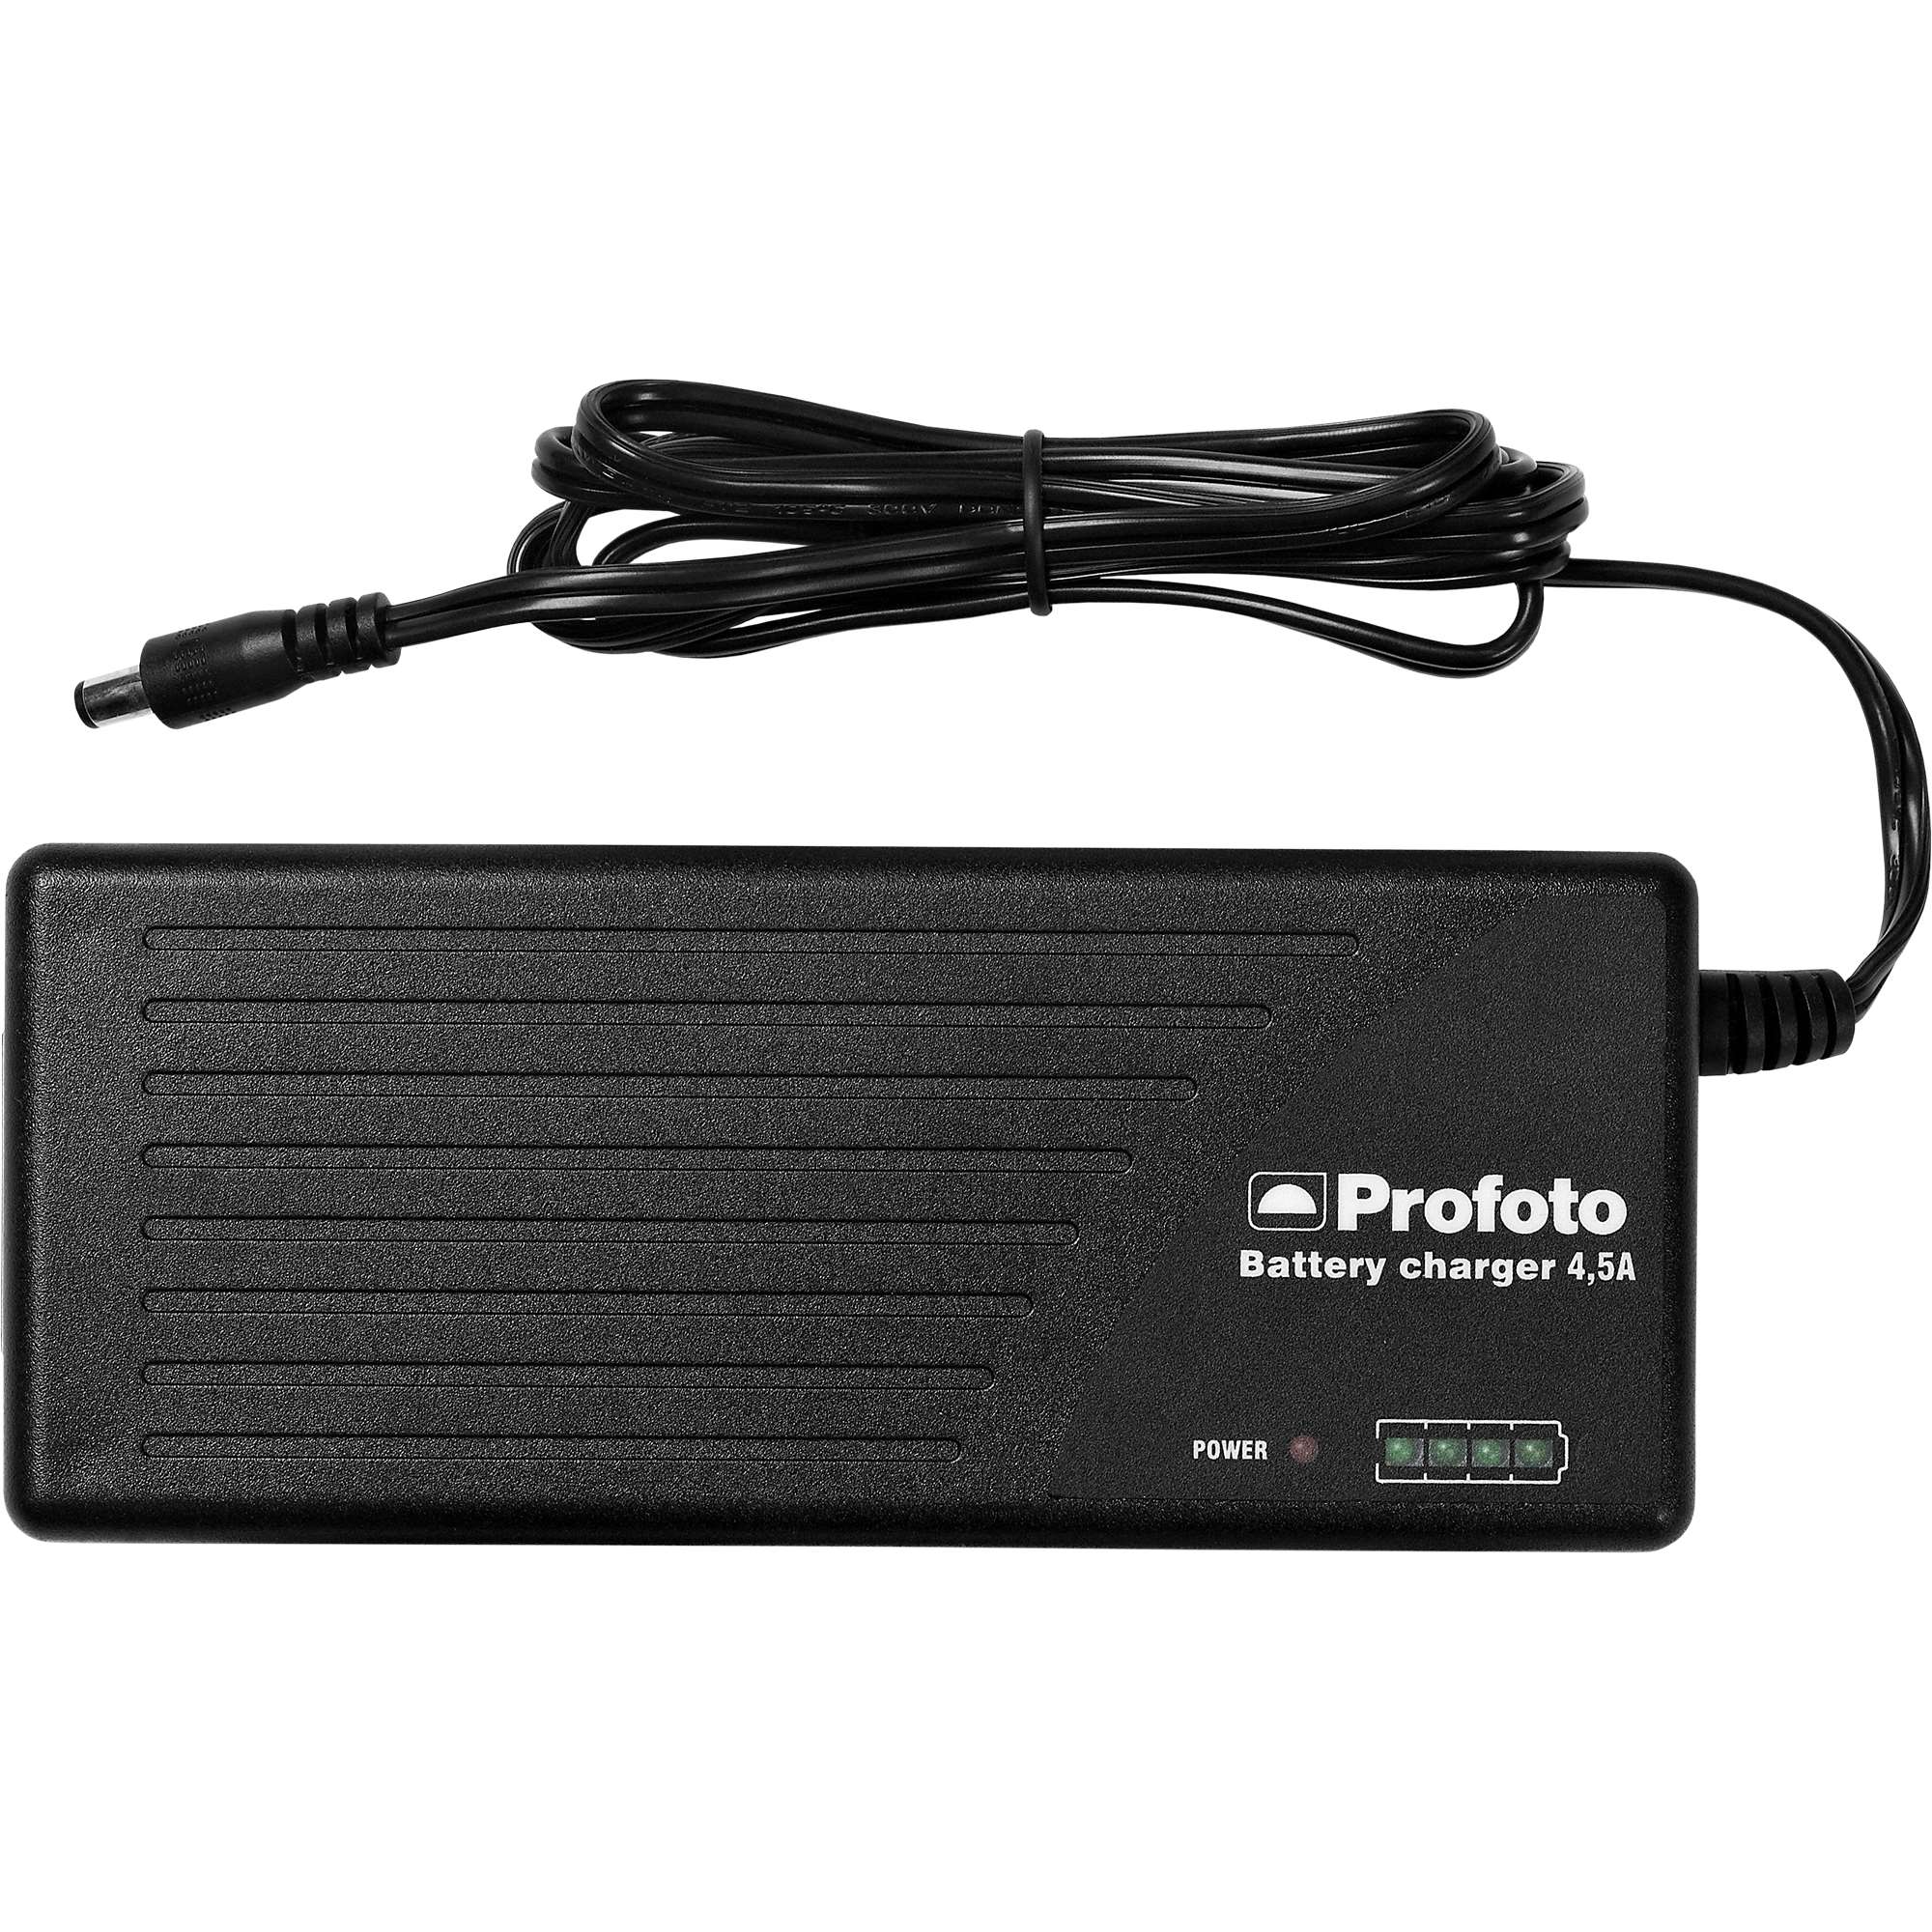 Profoto 'Fast' Battery Charger 4.5A (for B1 / B1X Only)